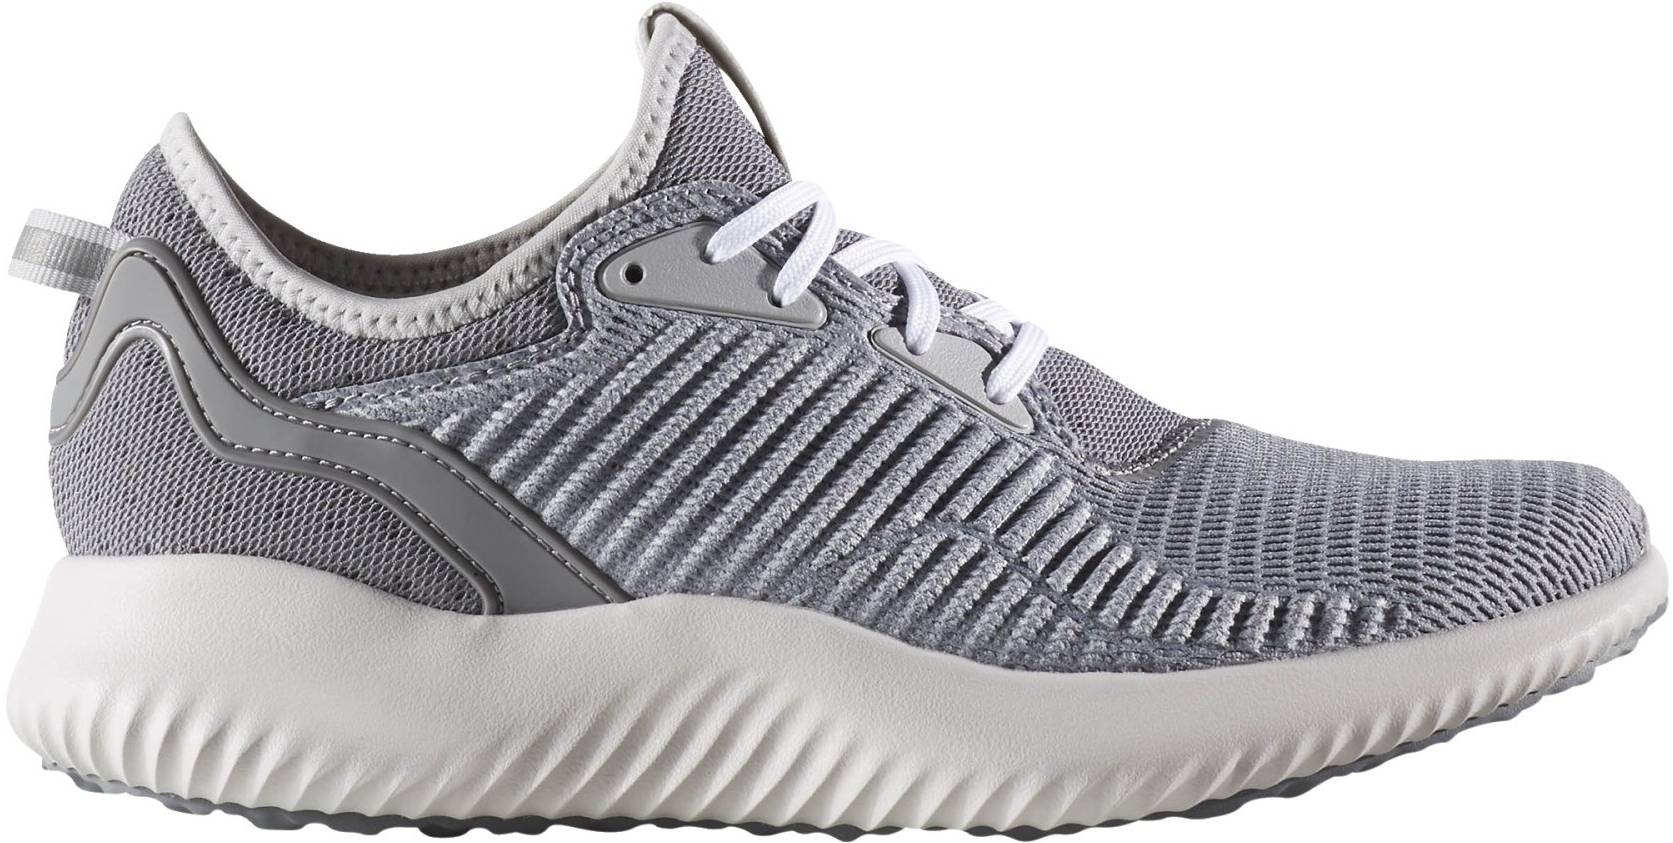 9 Reasons to/NOT to Buy Adidas Alphabounce Lux (Dec 2020) | RunRepeat